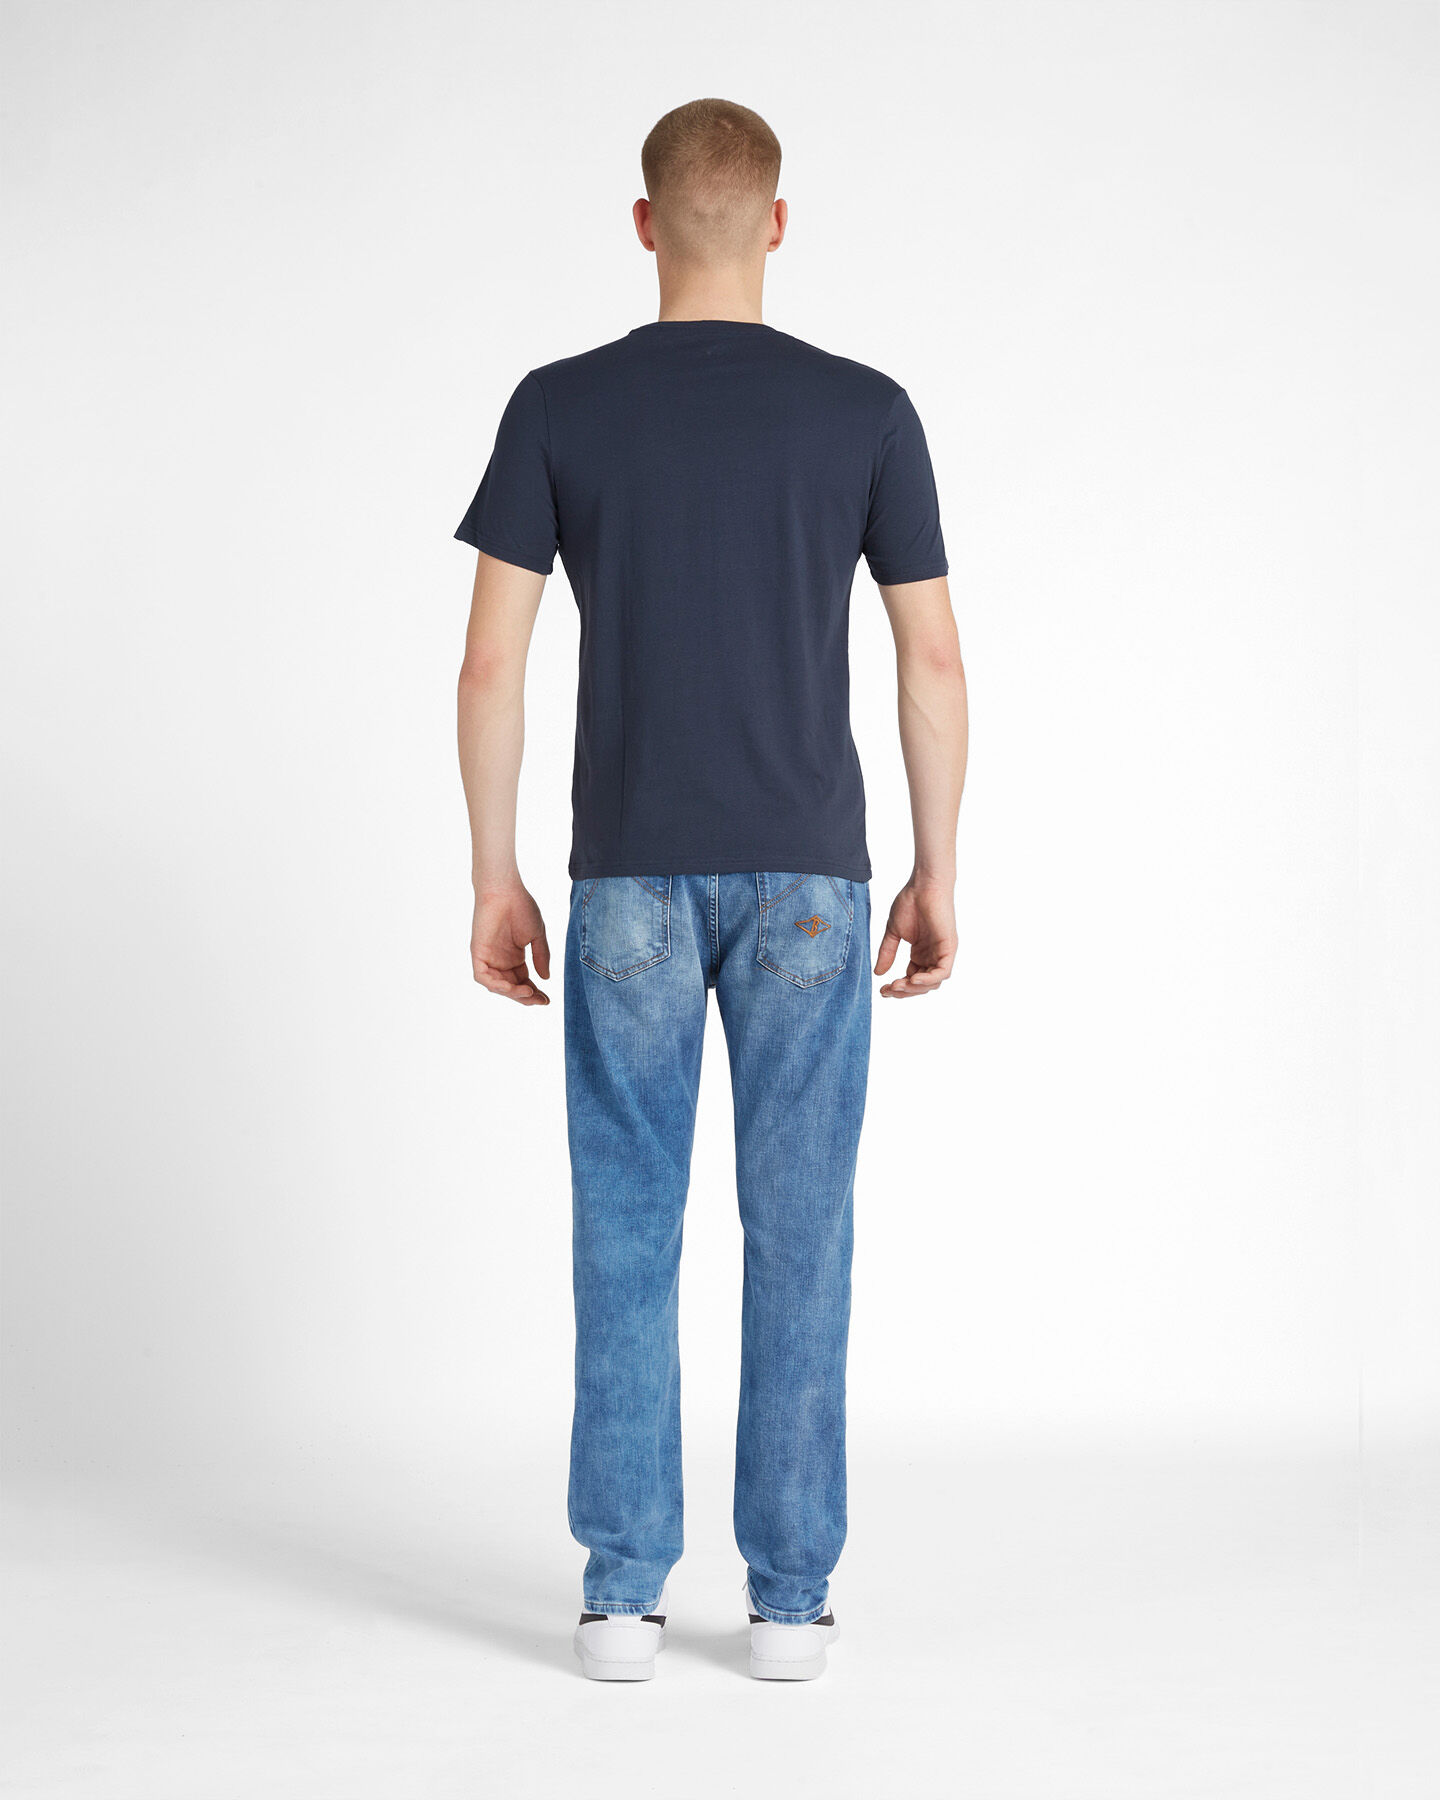  T-Shirt DACK'S BASIC COLLECTION M S4118351|1125|XS scatto 2